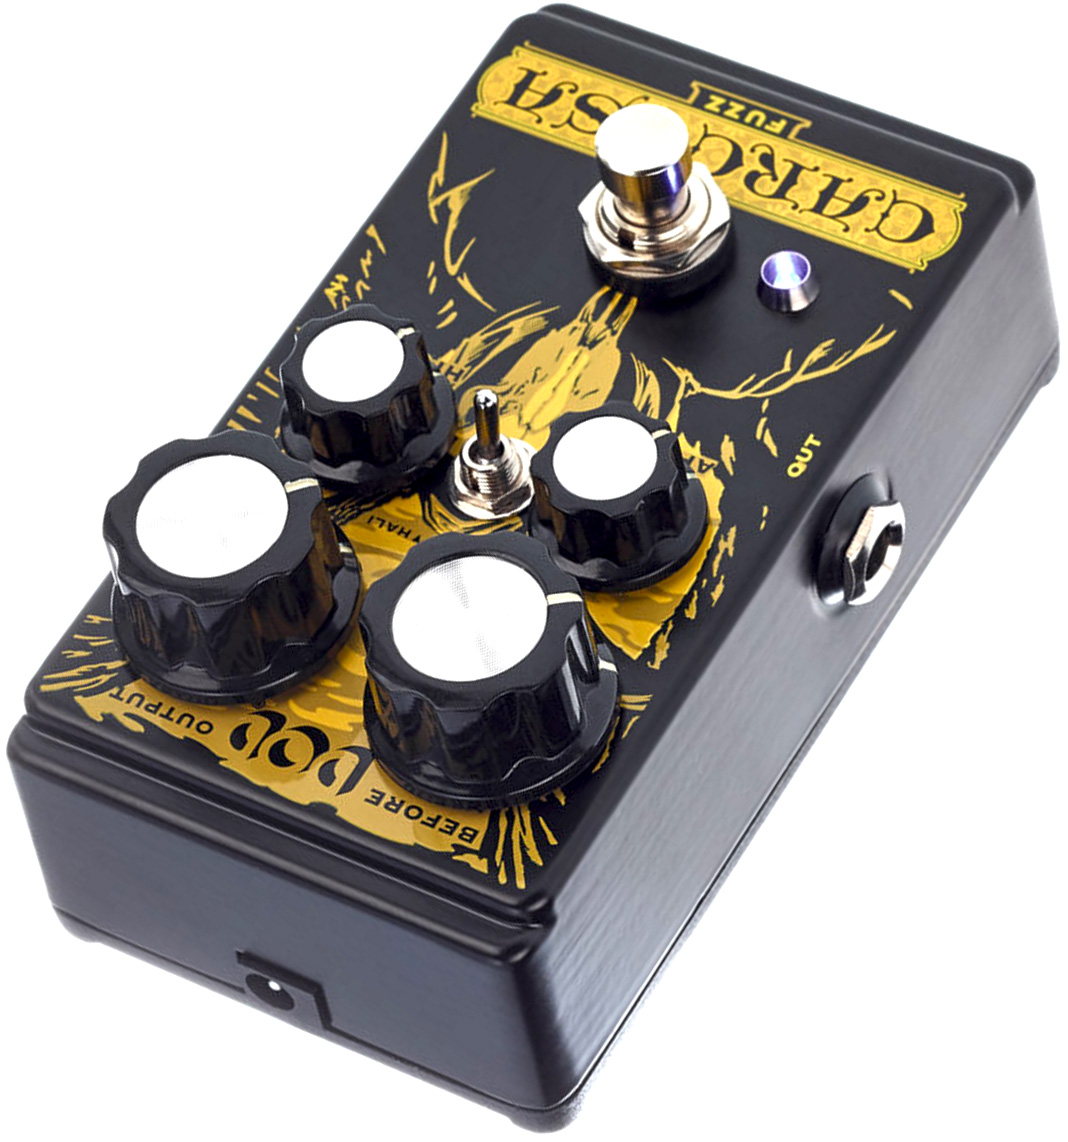 Dod Carcosa Fuzz - Overdrive, distortion & fuzz effect pedal - Variation 6